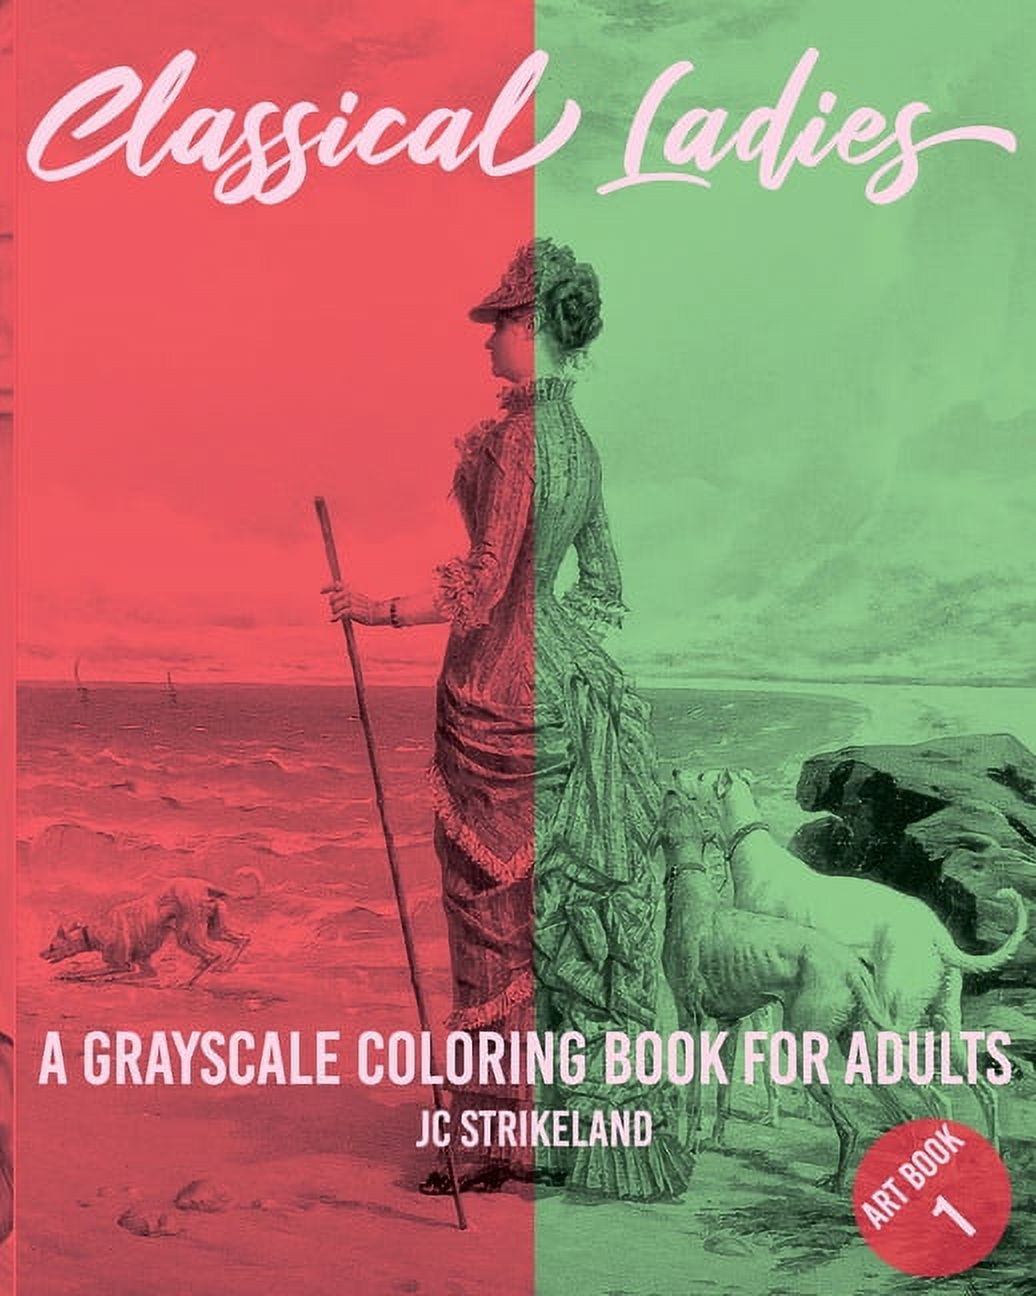 Greyscale Journal Diaries: Classical Ladies A Grayscale Coloring Book for Adults Art Book 1 : Vintage Elegant Artwork of Women - Beautiful Journal and Write Notebook with Paintings Illustration and Drawings of Ladies for Relaxation Meditation and Recovery Artist (Series #1) (Paperback) - image 1 of 1